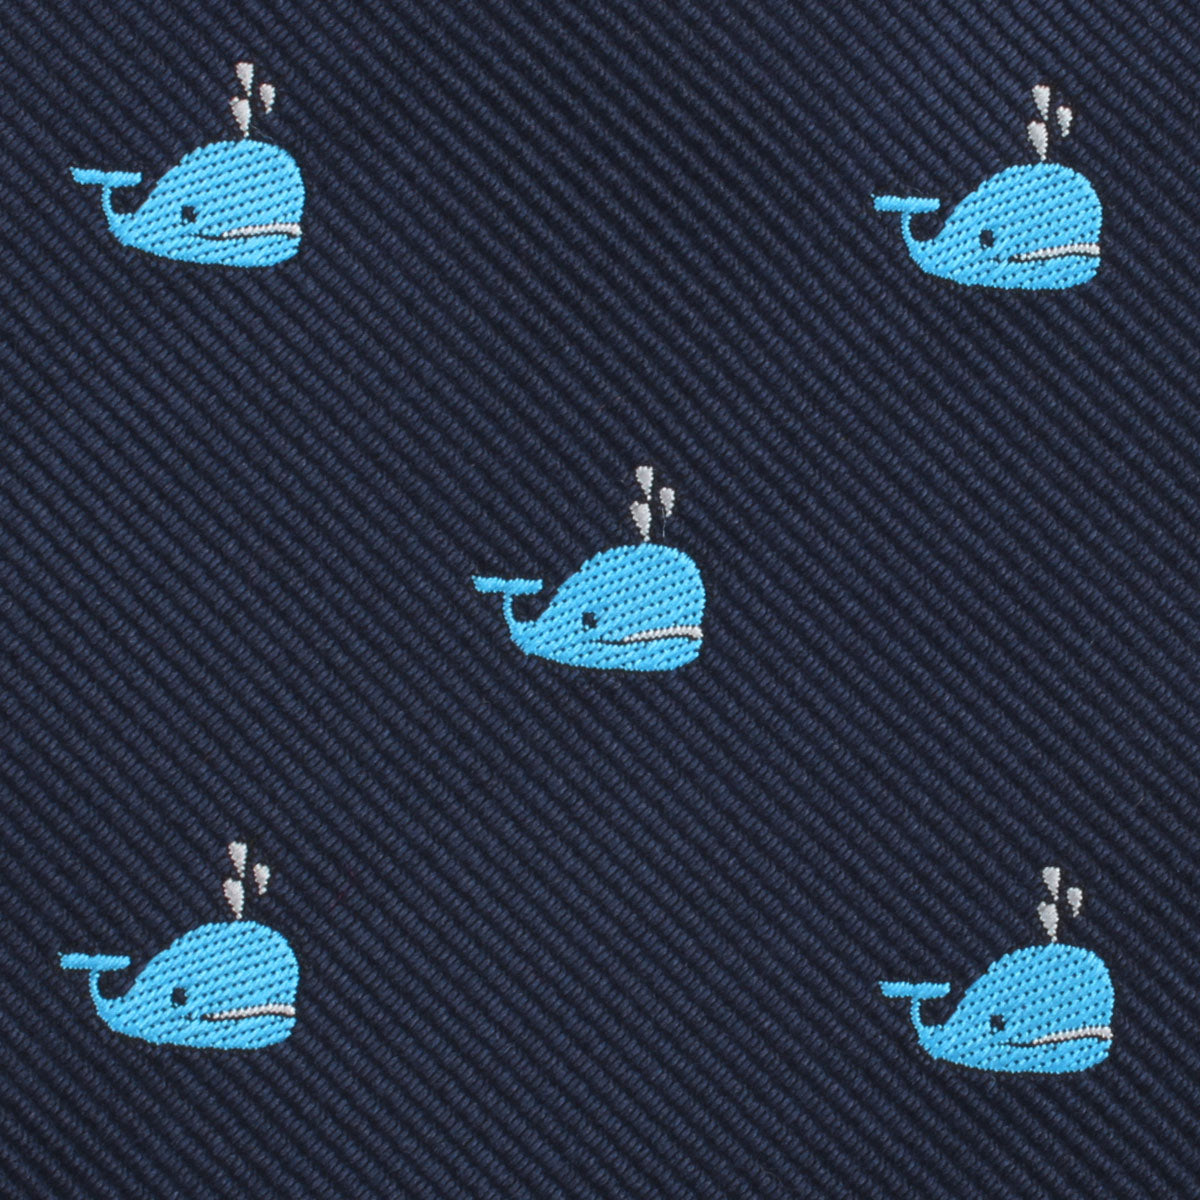 Laboon Blue Whale Pocket Square Fabric